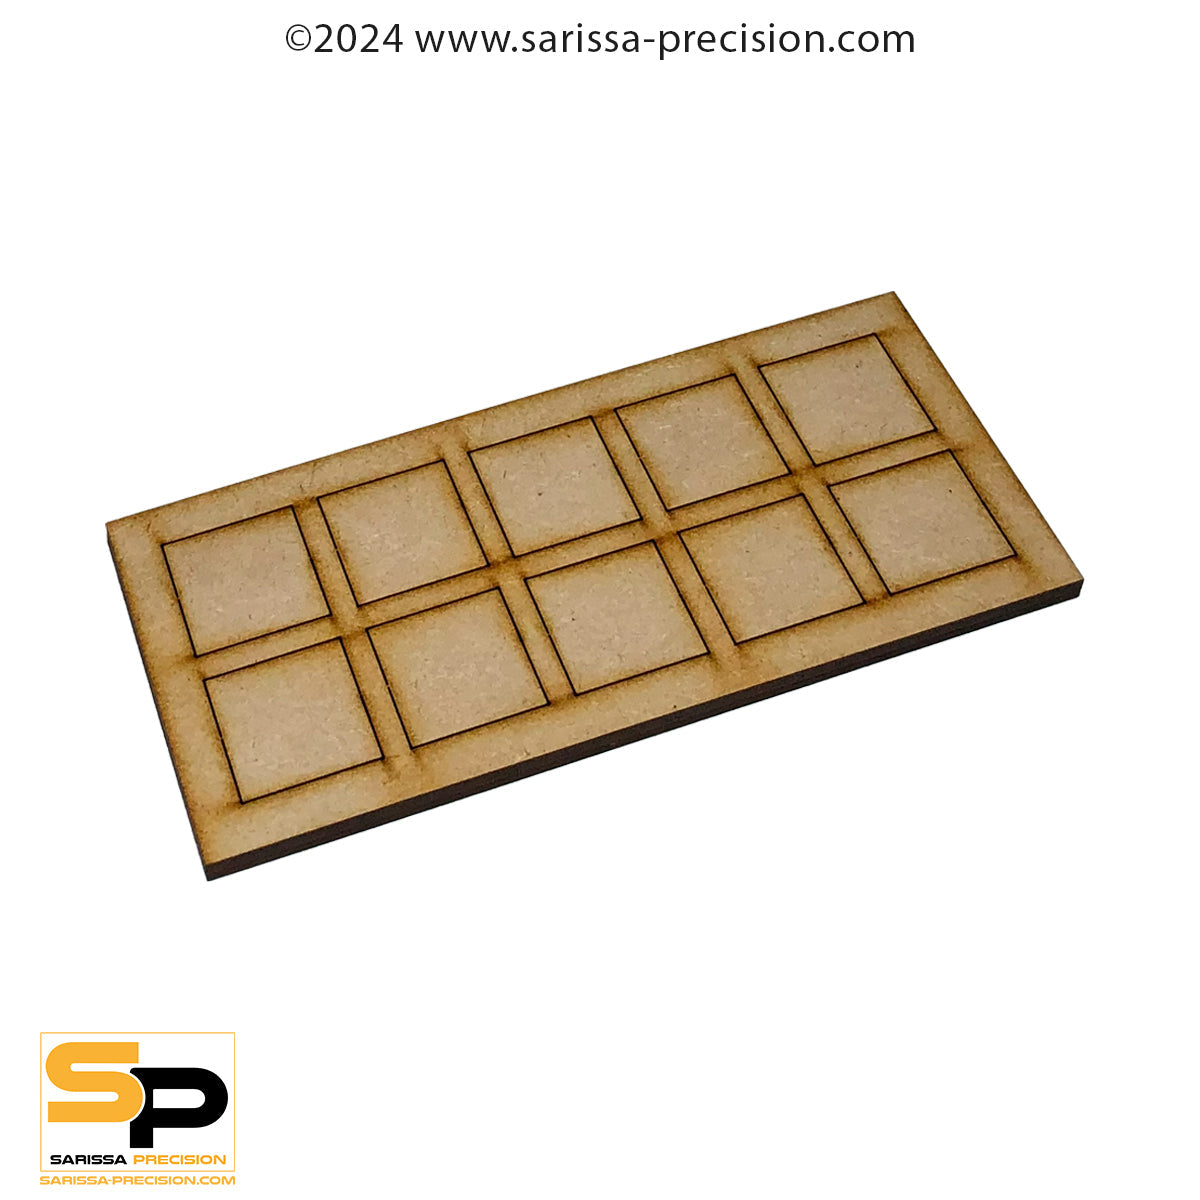 14x2 30x30mm Conversion Tray for 25x25mm bases